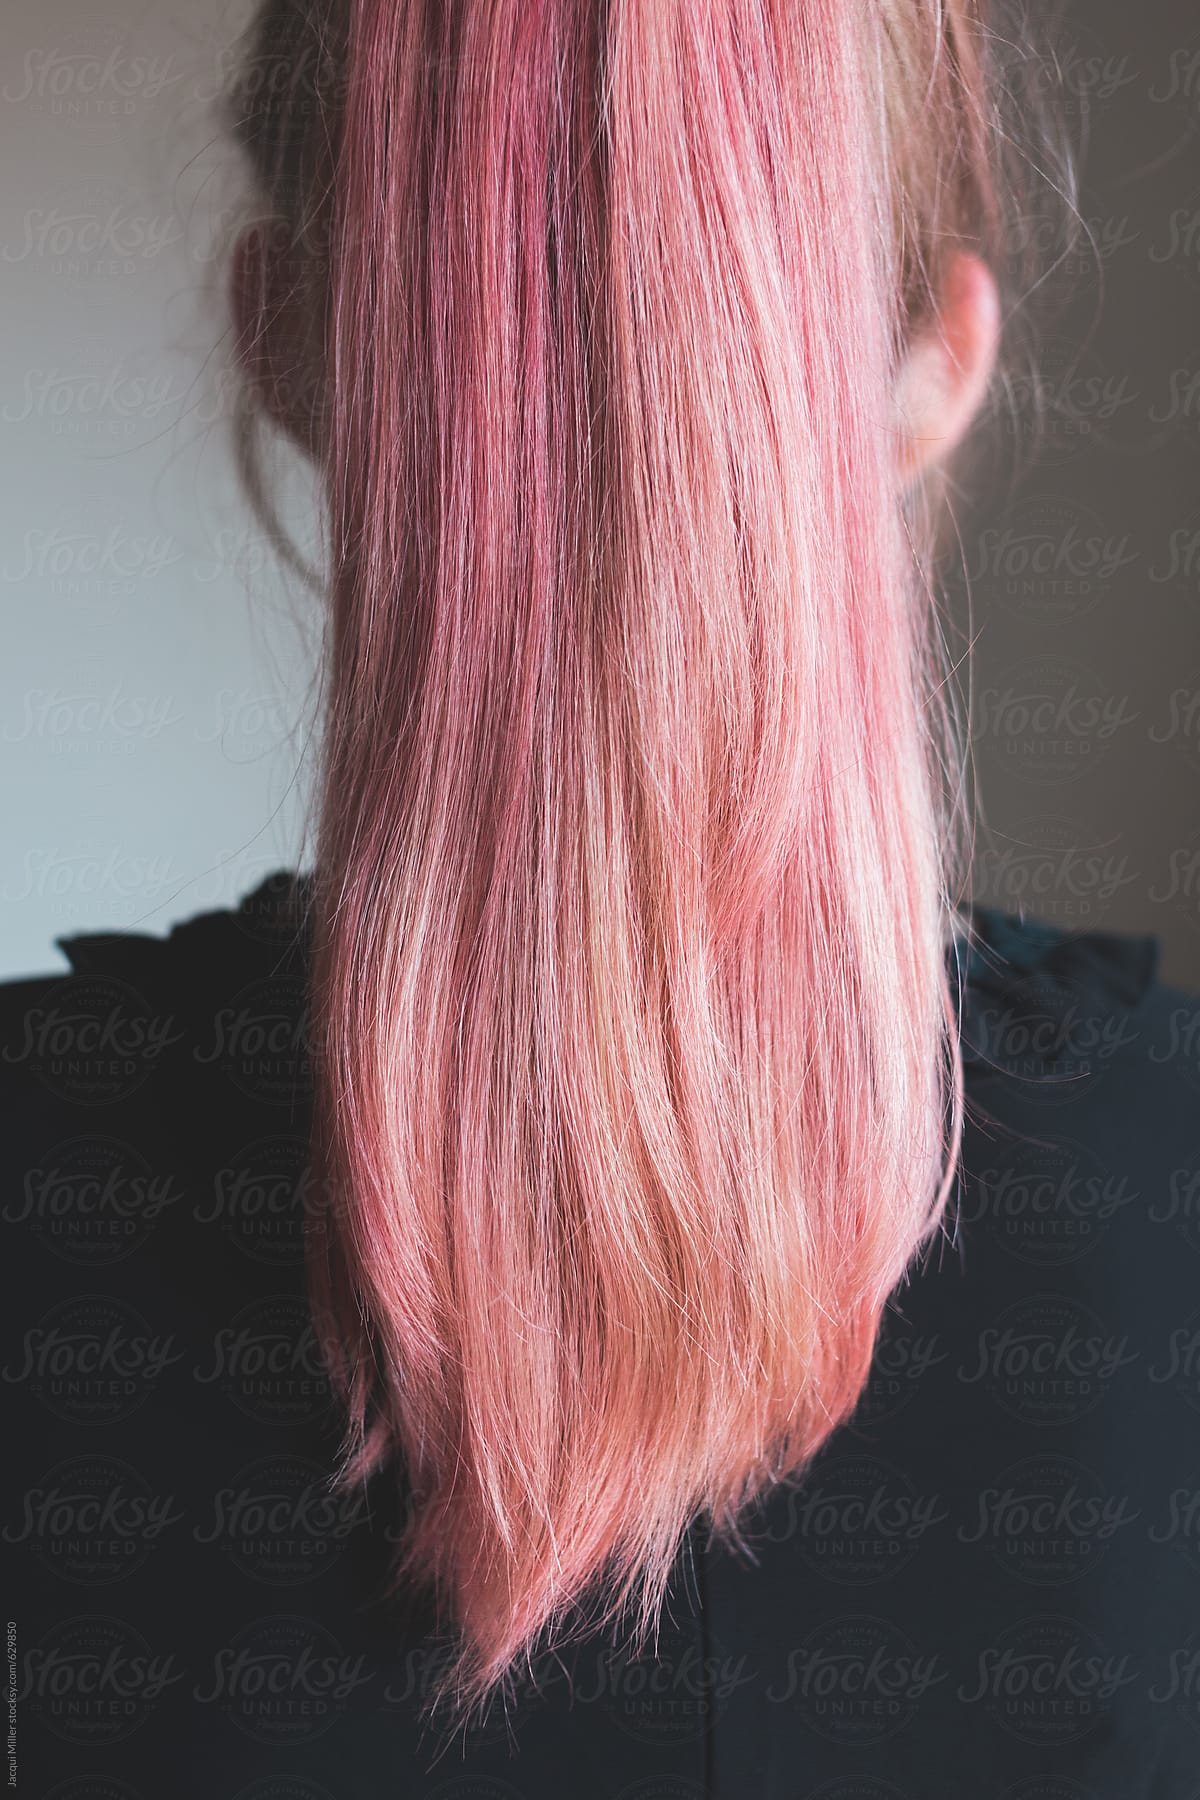 How to remove pink dye out of my hair - Quora